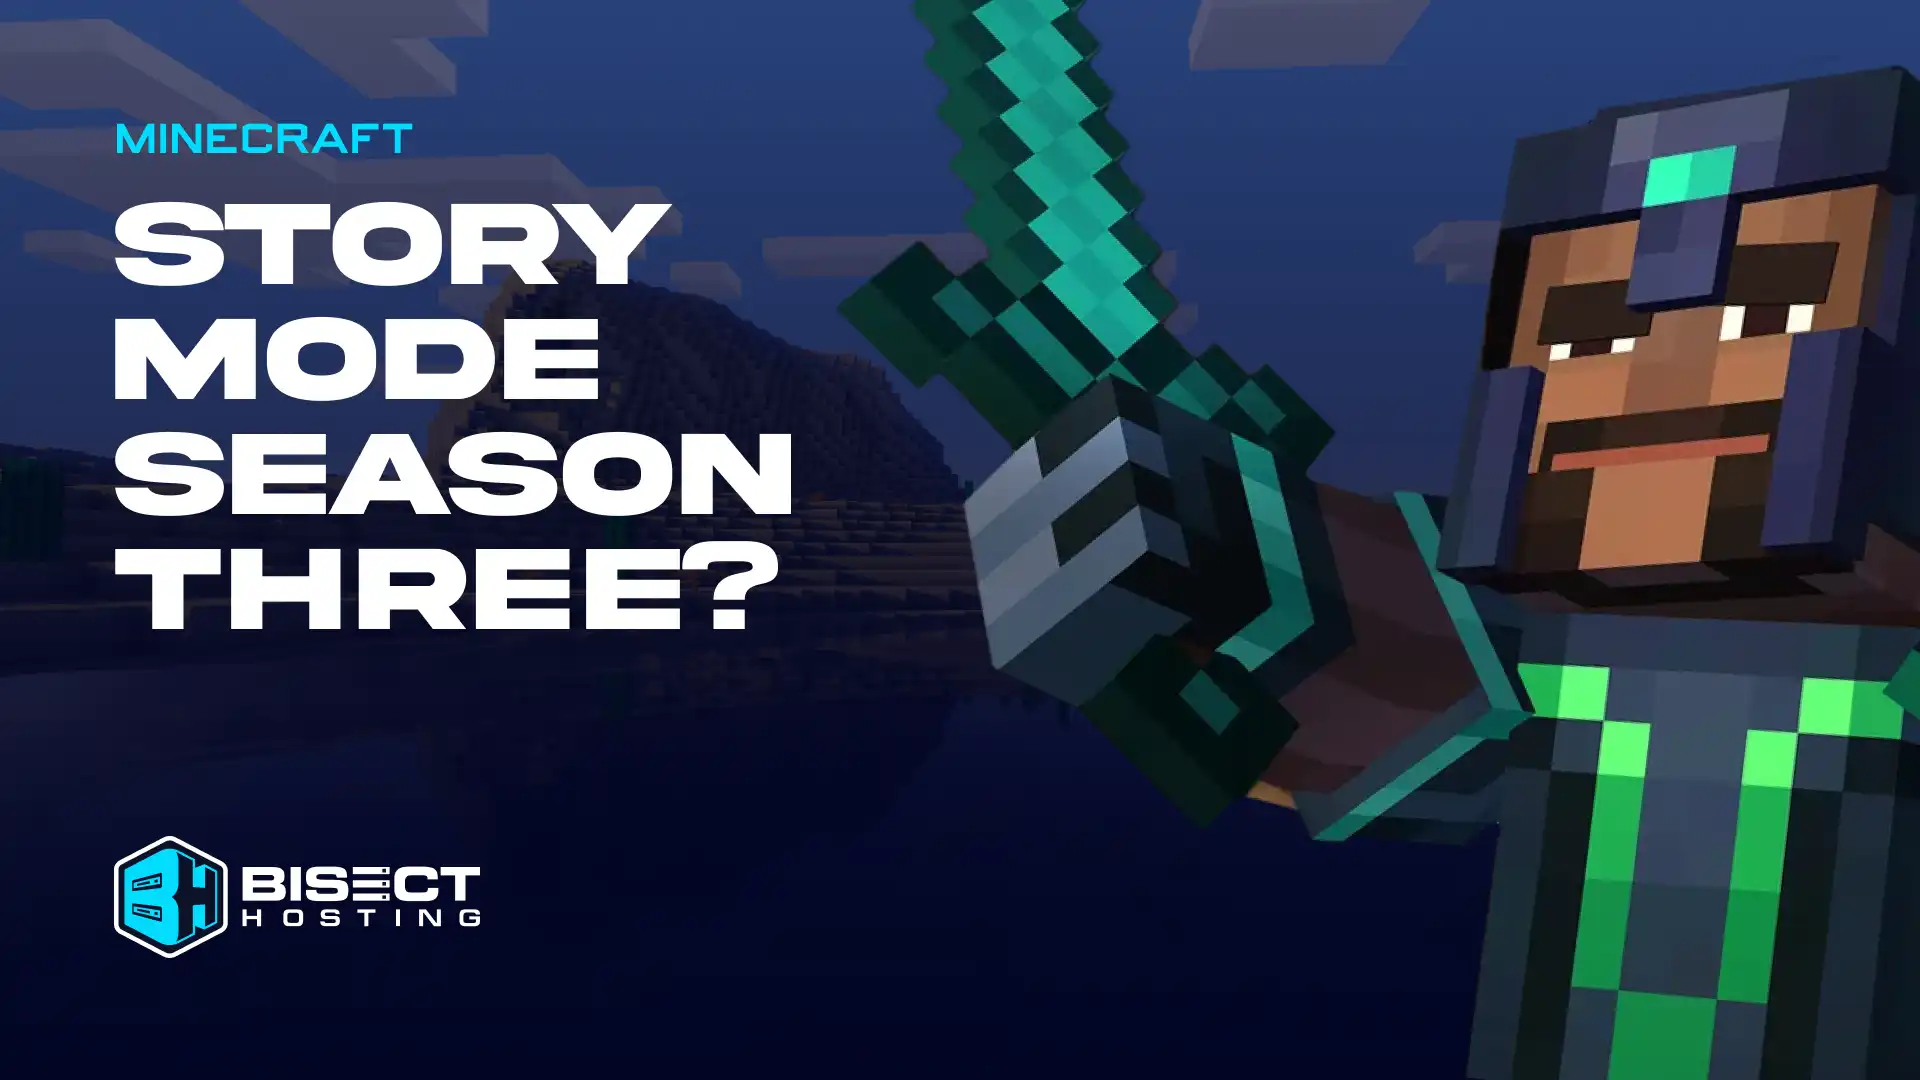 Will There Be a Minecraft Story Mode Season 3?